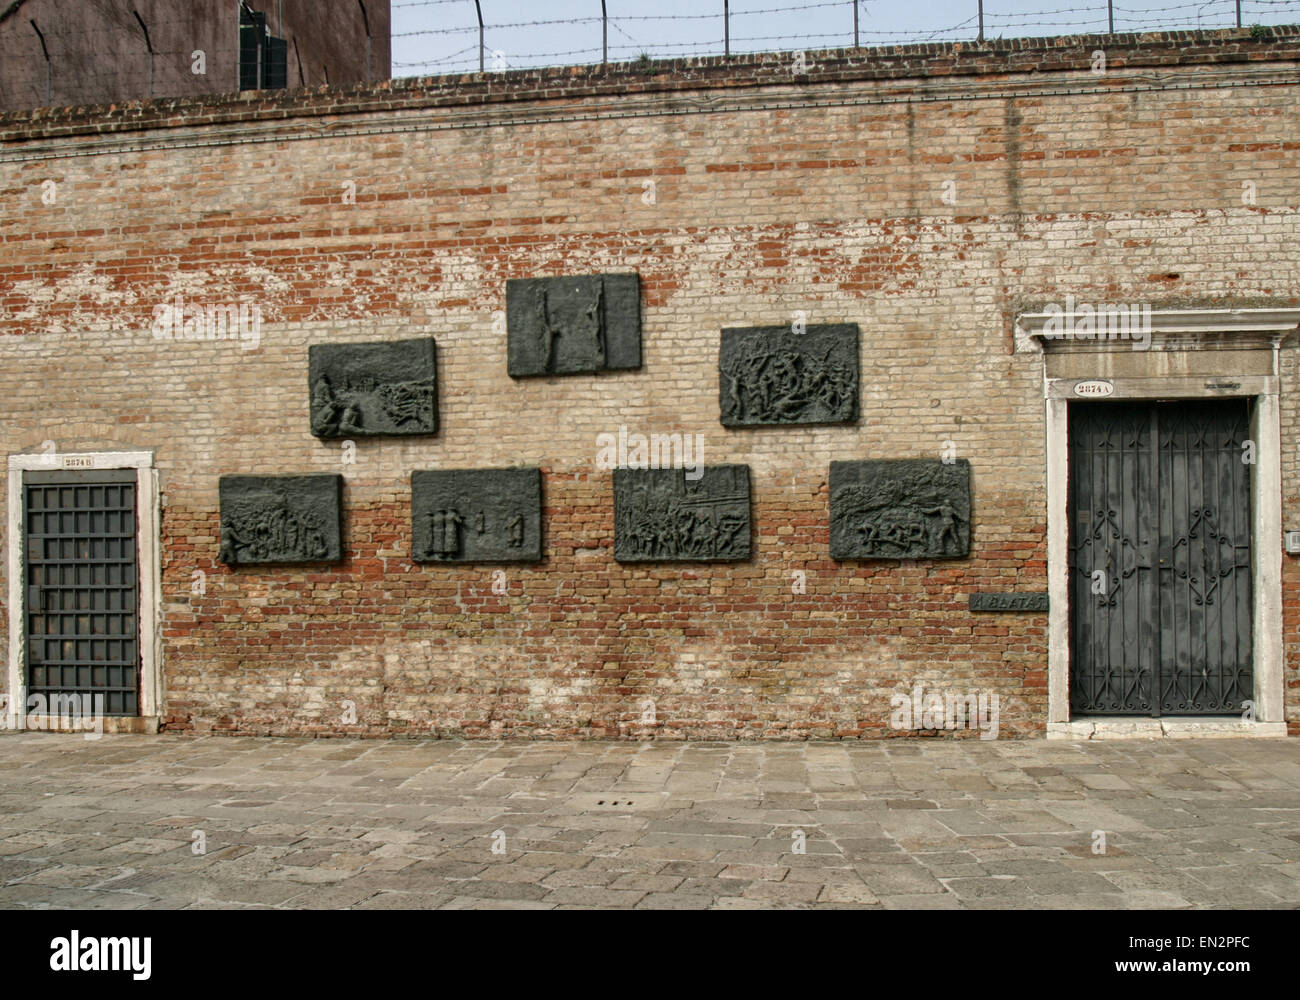 Venice, Province of Venice, ITALY. 7th Oct, 2004. In 1979 Arbit Blatas, a Lithuanian-born artist who lost his mother in the Holocaust, created this seven-panel bronze bas-relief Holocaust memorial, by the request of the Jewish Community of Venice. On a wall of the Campo del Nuovo Ghetto, it commemorates the night of Dec. 5, 1943, when the first 200 of the city's Jews were rounded up and marched out for deportation and death. Venice, a UNESCO World Heritage Site, is one of the most popular international tourist destinations. © Arnold Drapkin/ZUMA Wire/Alamy Live News Stock Photo